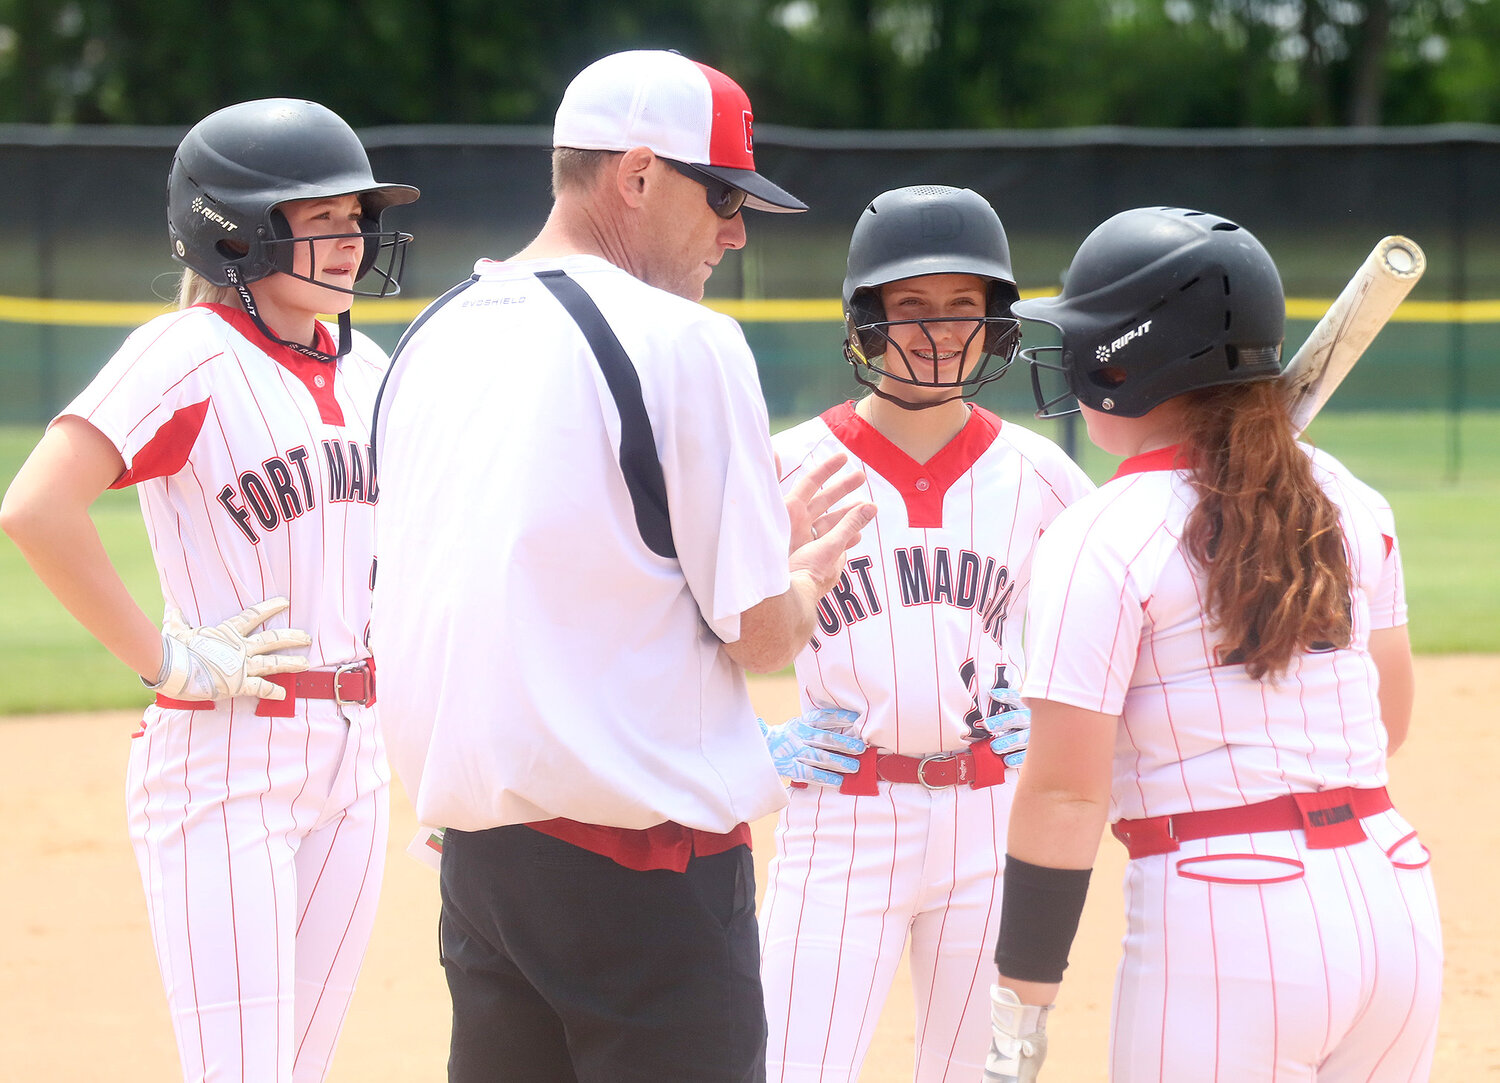 Fort Madison Head softball coach Jared Rehm talks with from left to right Taylor Johnson, Reilynn Turnbull, and Kylie Lumino during a Fairfield timeout Tuesday afternoon at Baxter Sports Complex in Fort Madison.